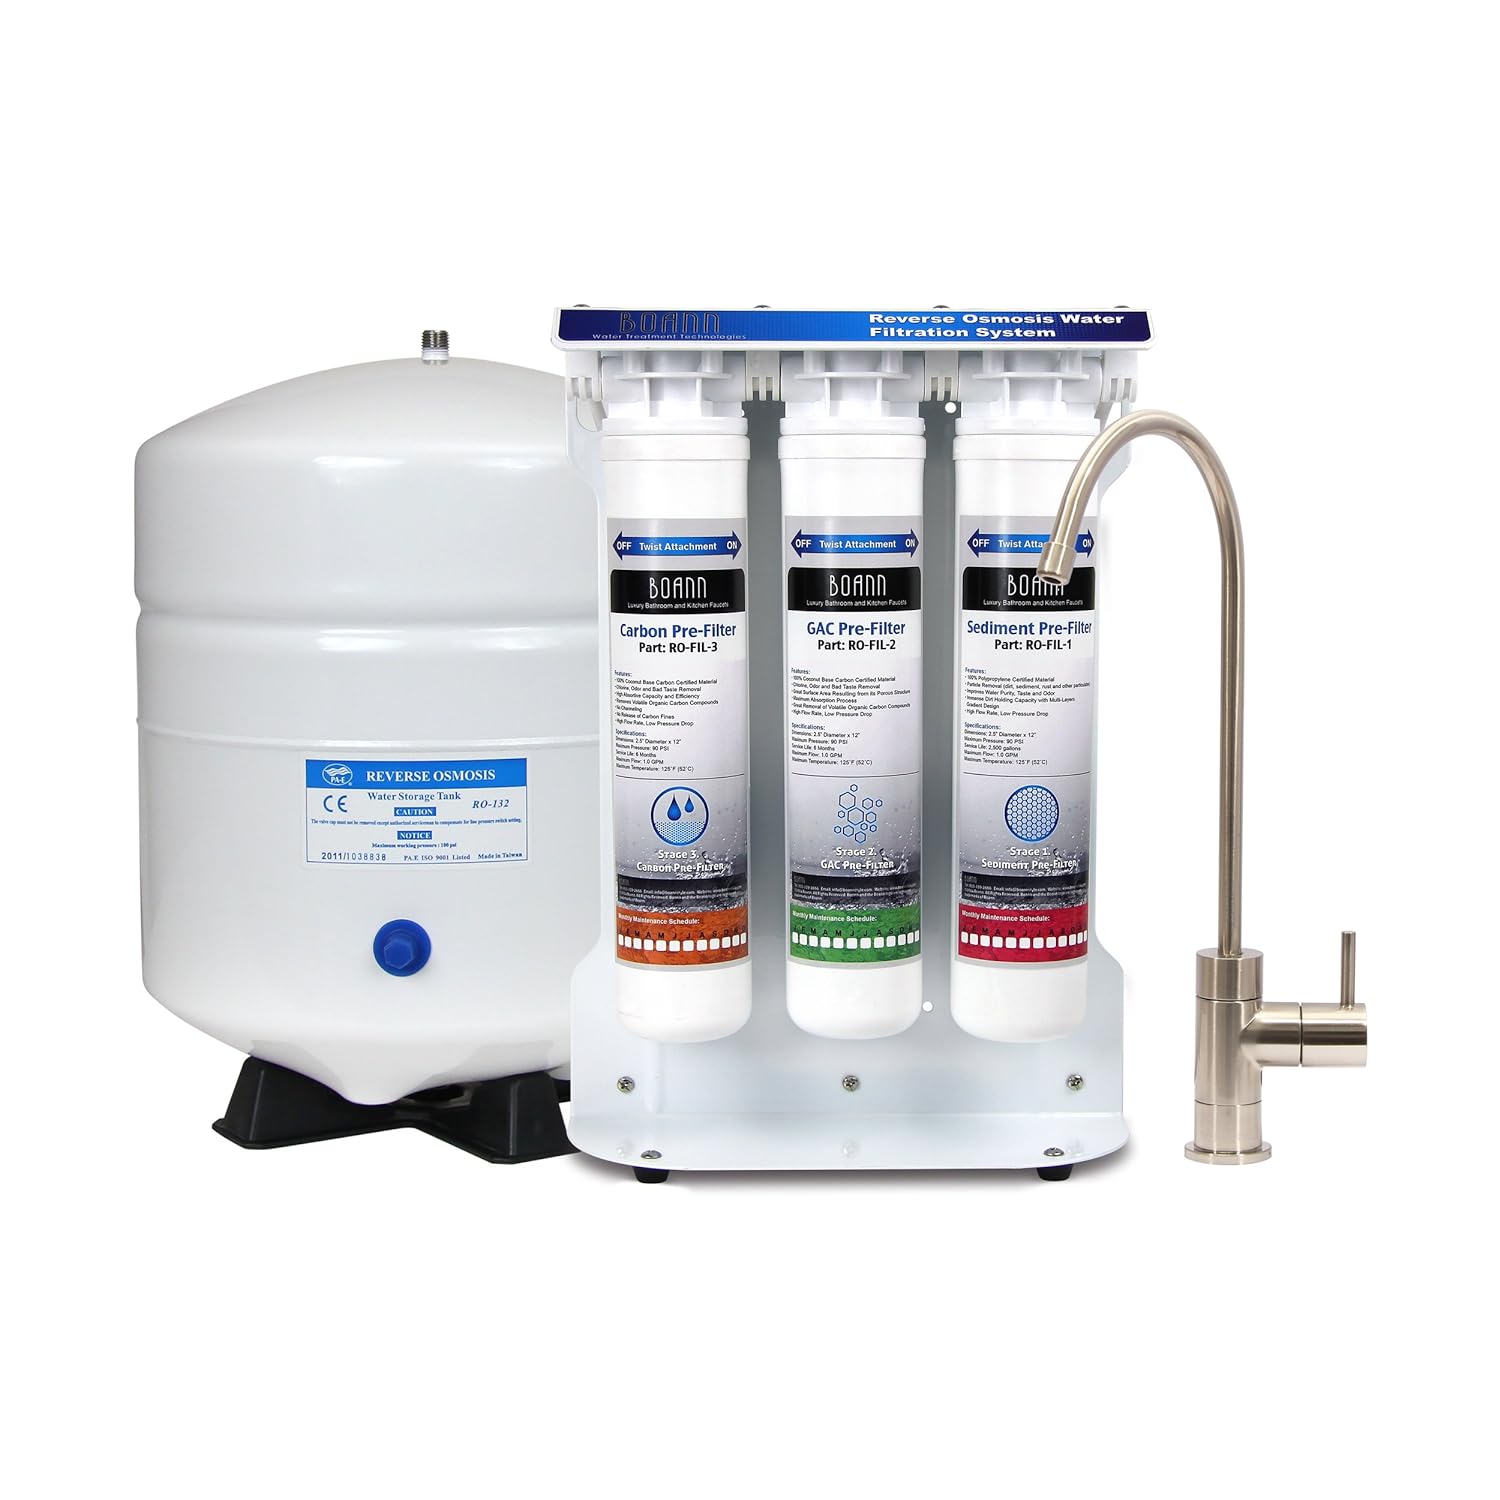 BOANN BNROSYS 5-Stage Reverse Osmosis Water Filter System with Quick-Twist Filters